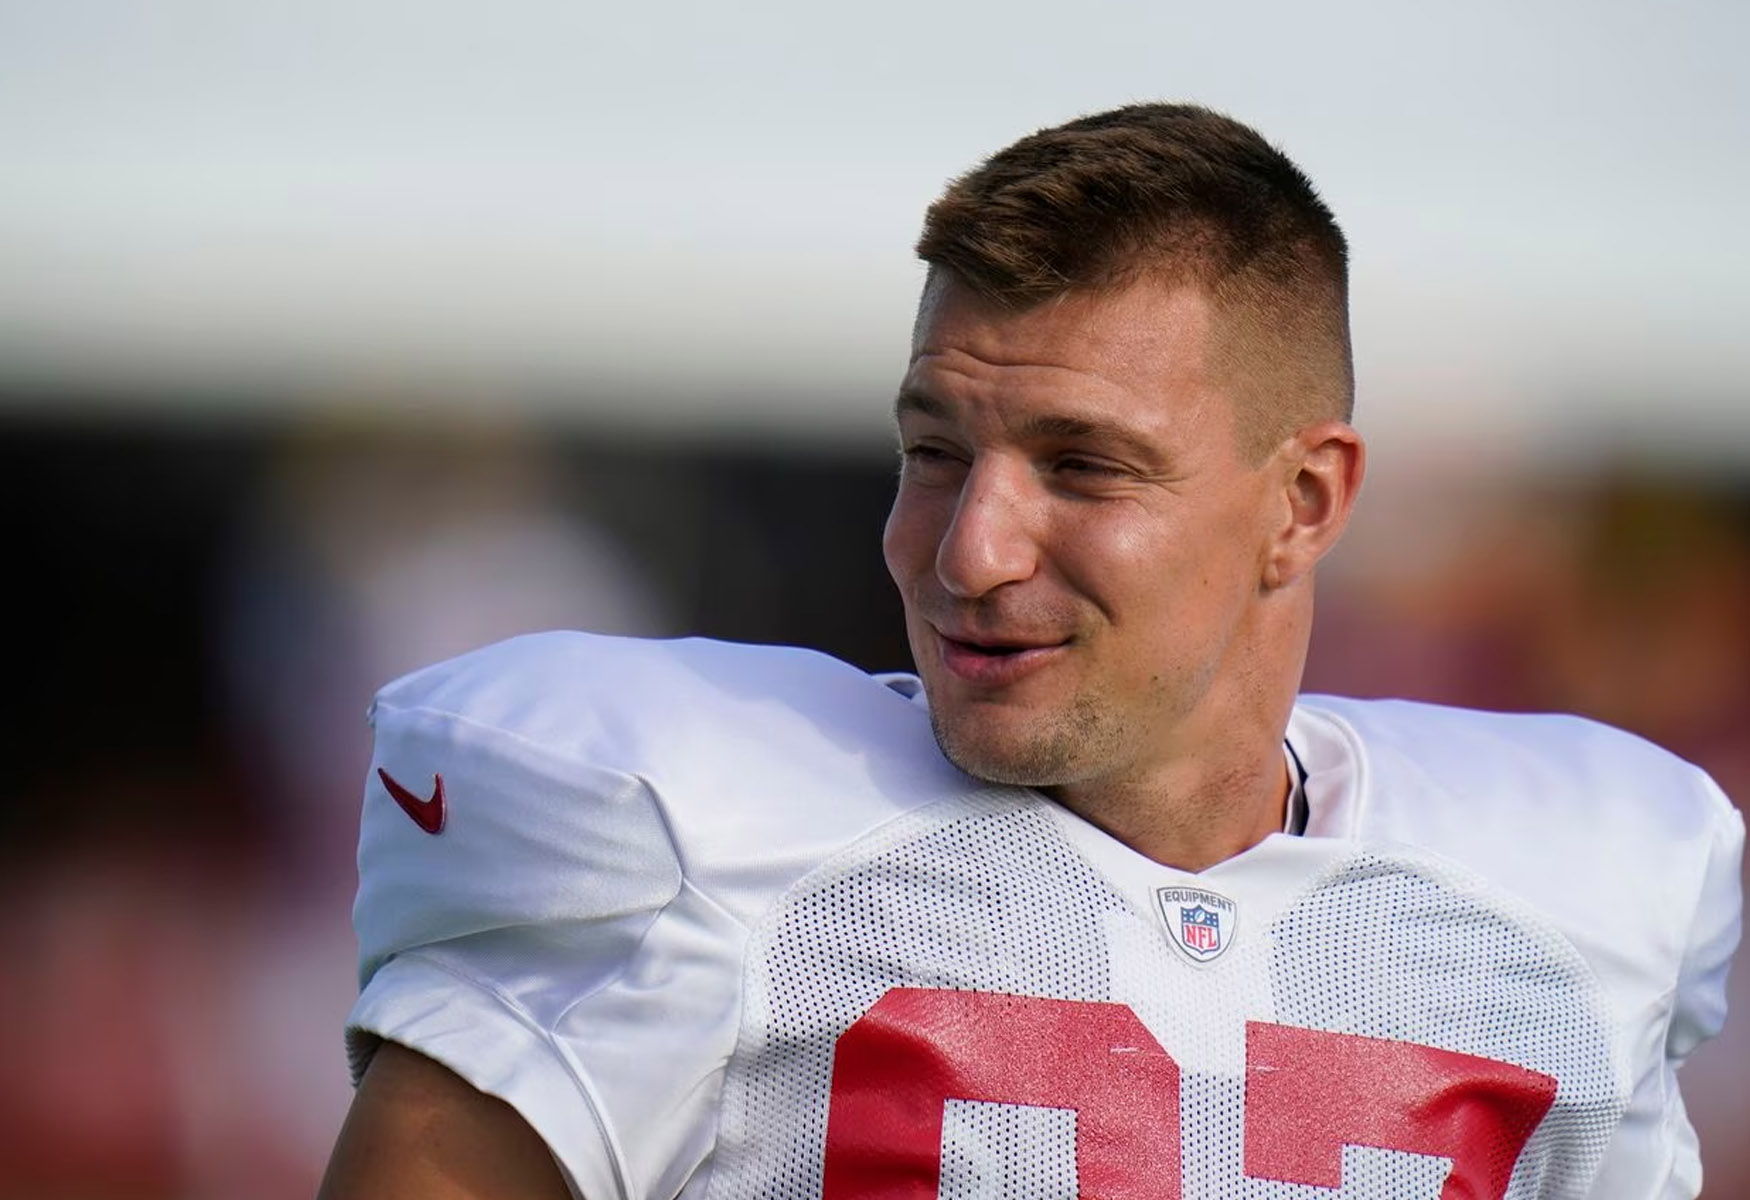 Rob Gronkowski Expresses Interest In Joining Olympic Flag Football Team